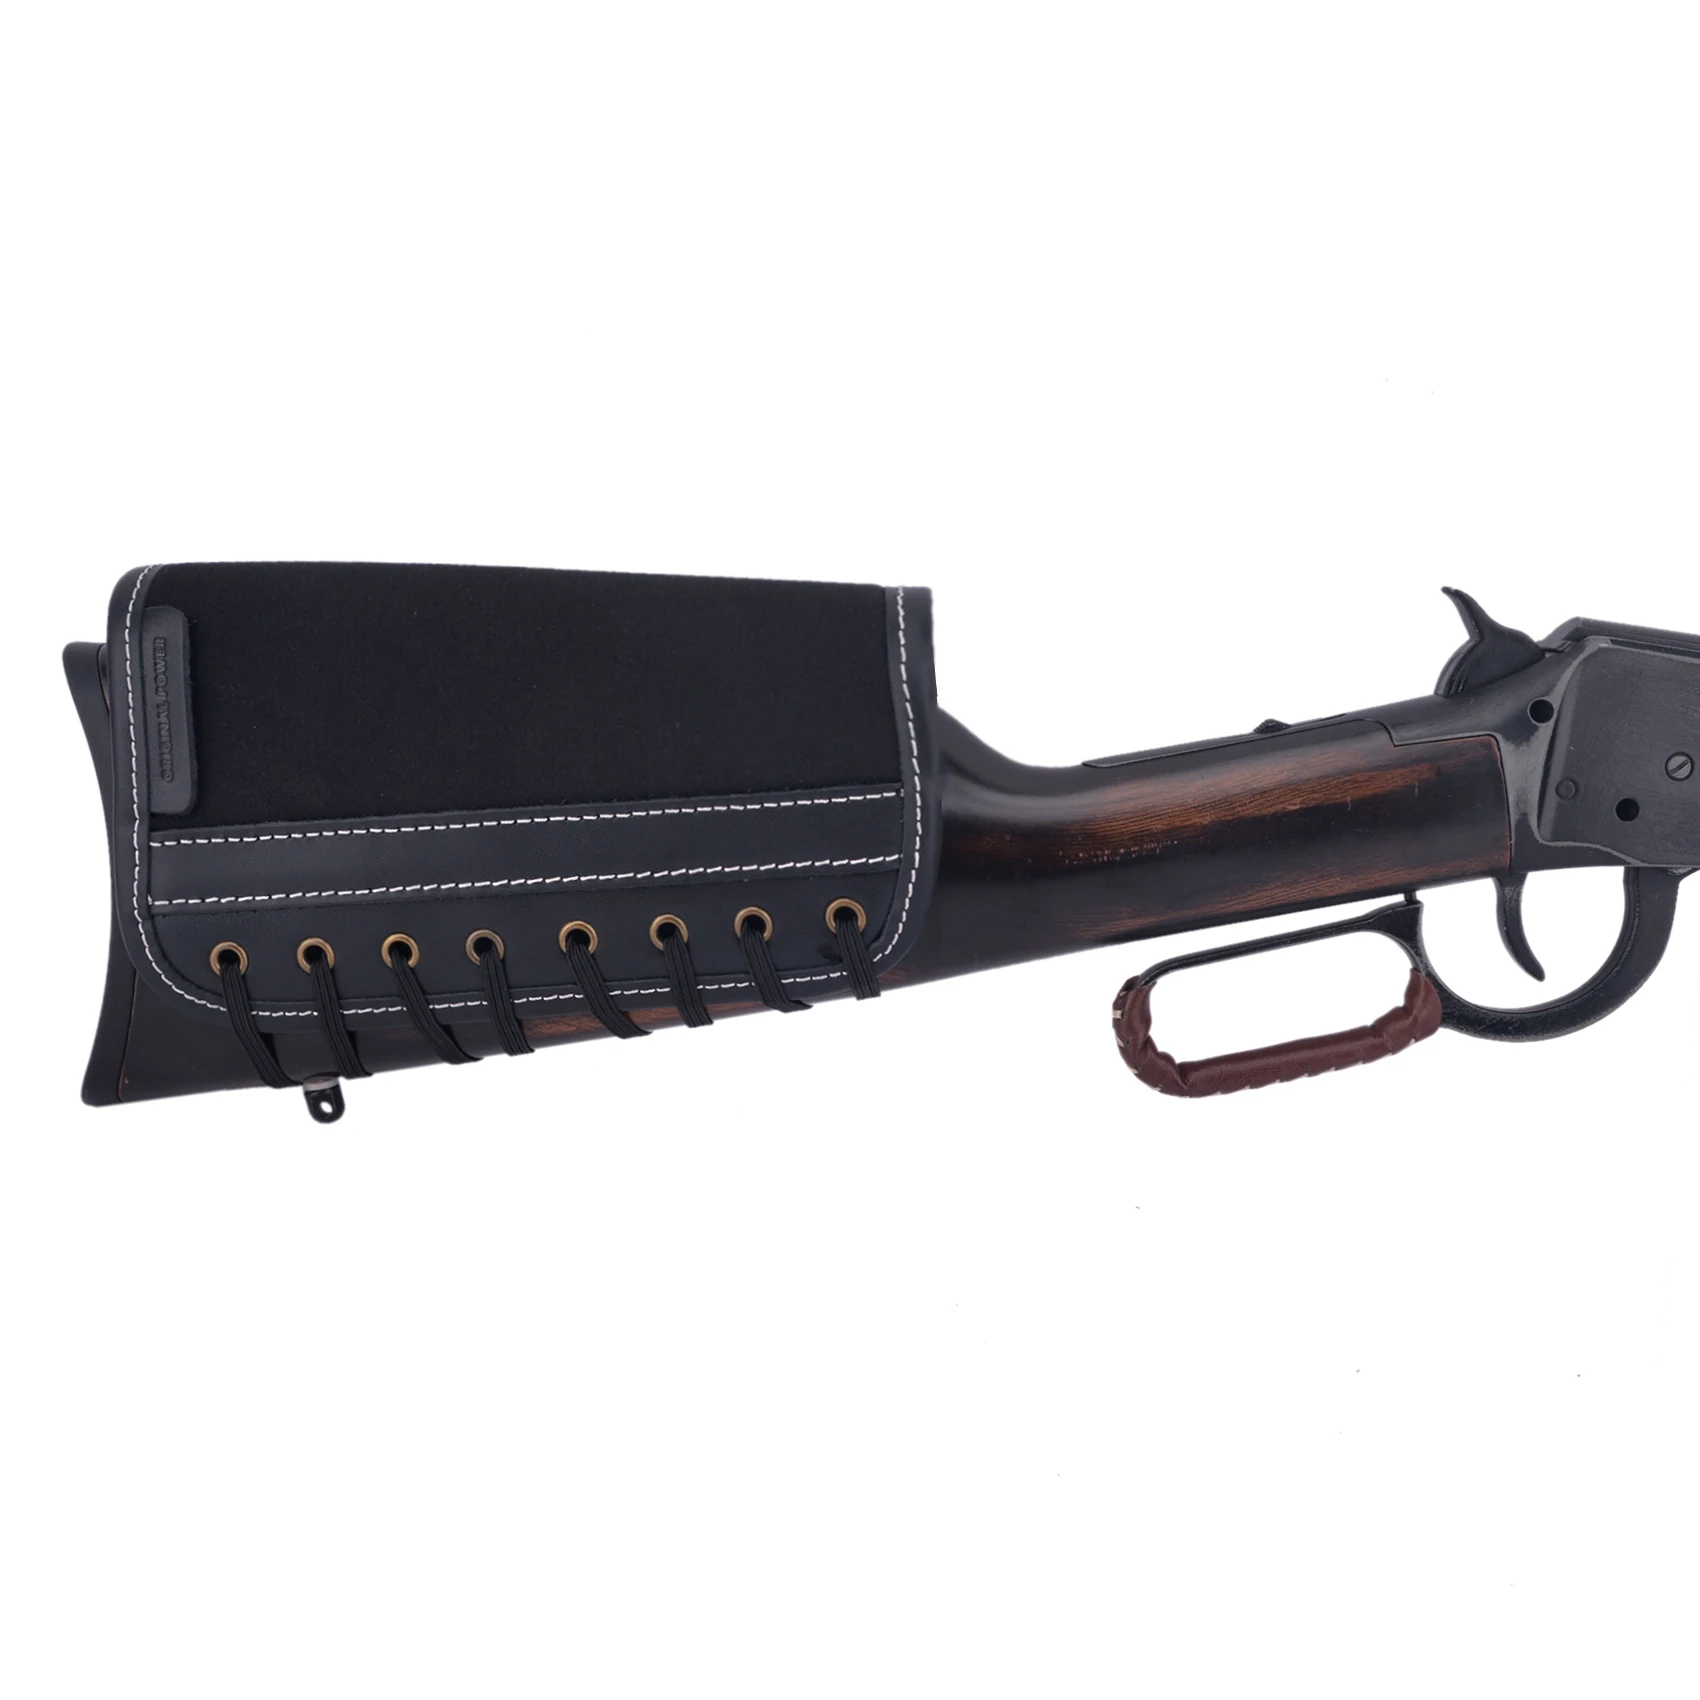 Leather Hunting Gun Accessories  Lever Action Rifle Accessories - Hunting  - Aliexpress